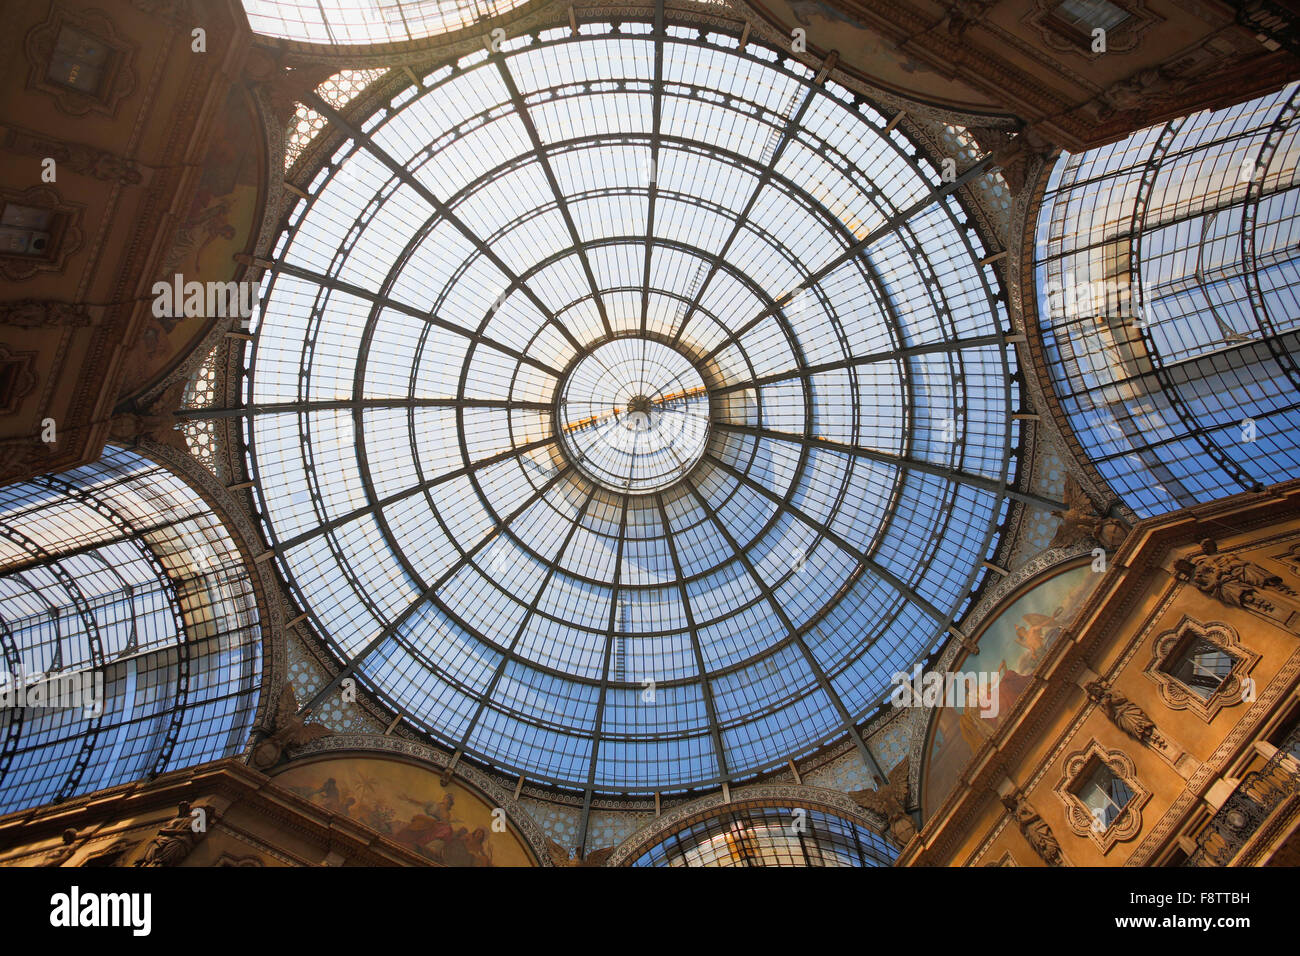 Milan, Milan Province, Lombardy, Italy.  Glass dome of Galleria Vittorio Emanuele II shopping arcade. Stock Photo